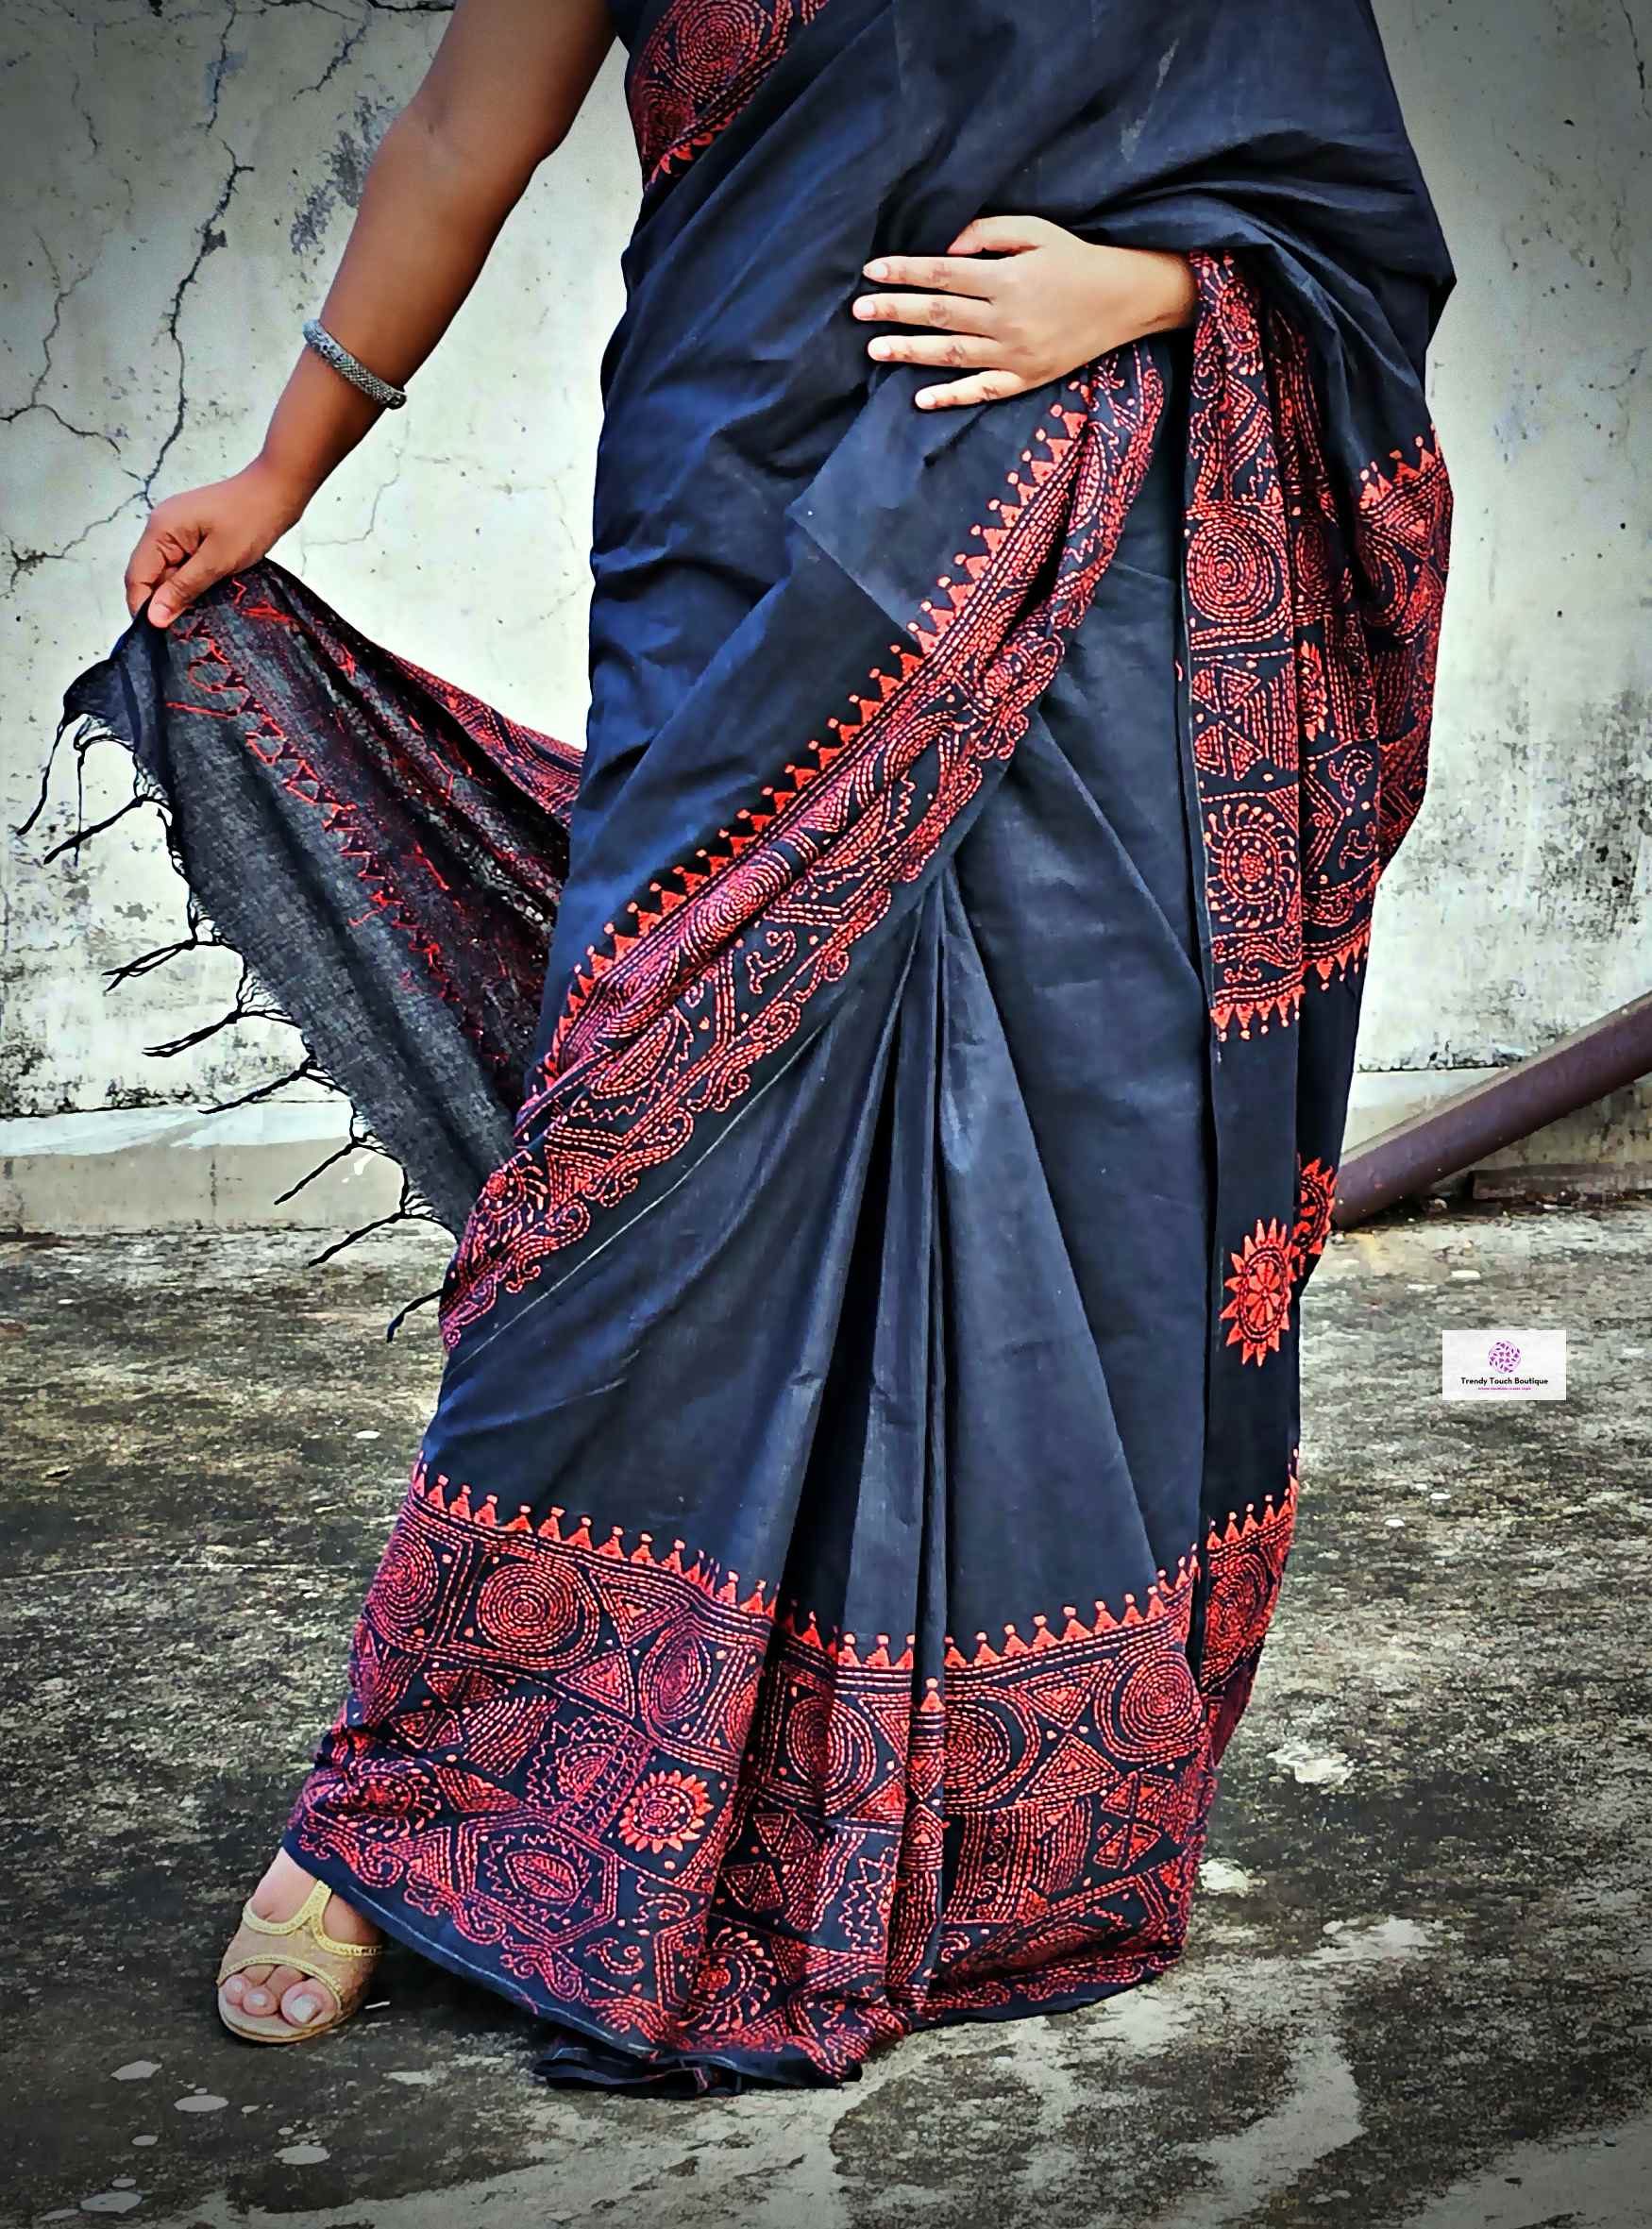 Khadi cotton handloom black saree with orange thread kantha hand embroidered best summer fabric for formal and casual styling marriage functions and family events with blouse piece best price